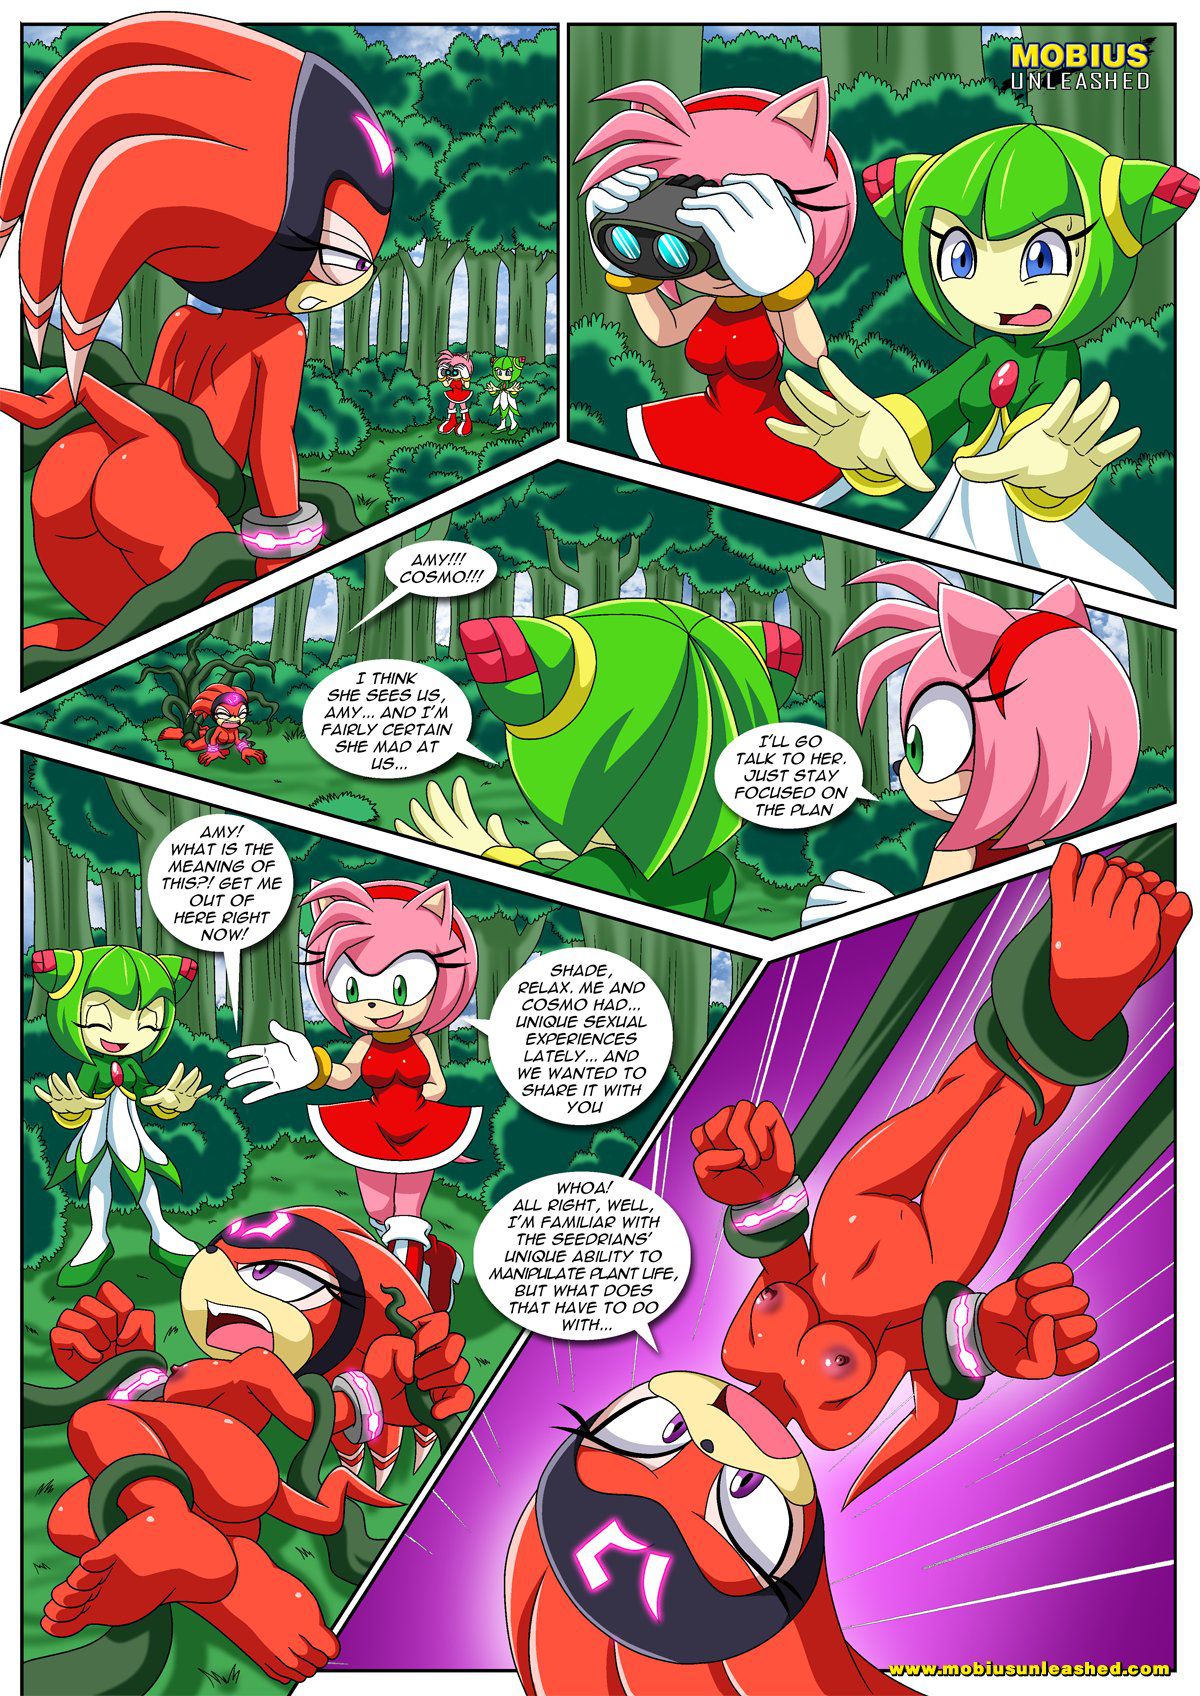 [Palcomix] Team GF's Tentacled Tale (Sonic The Hedgehog) [Ongoing] 9